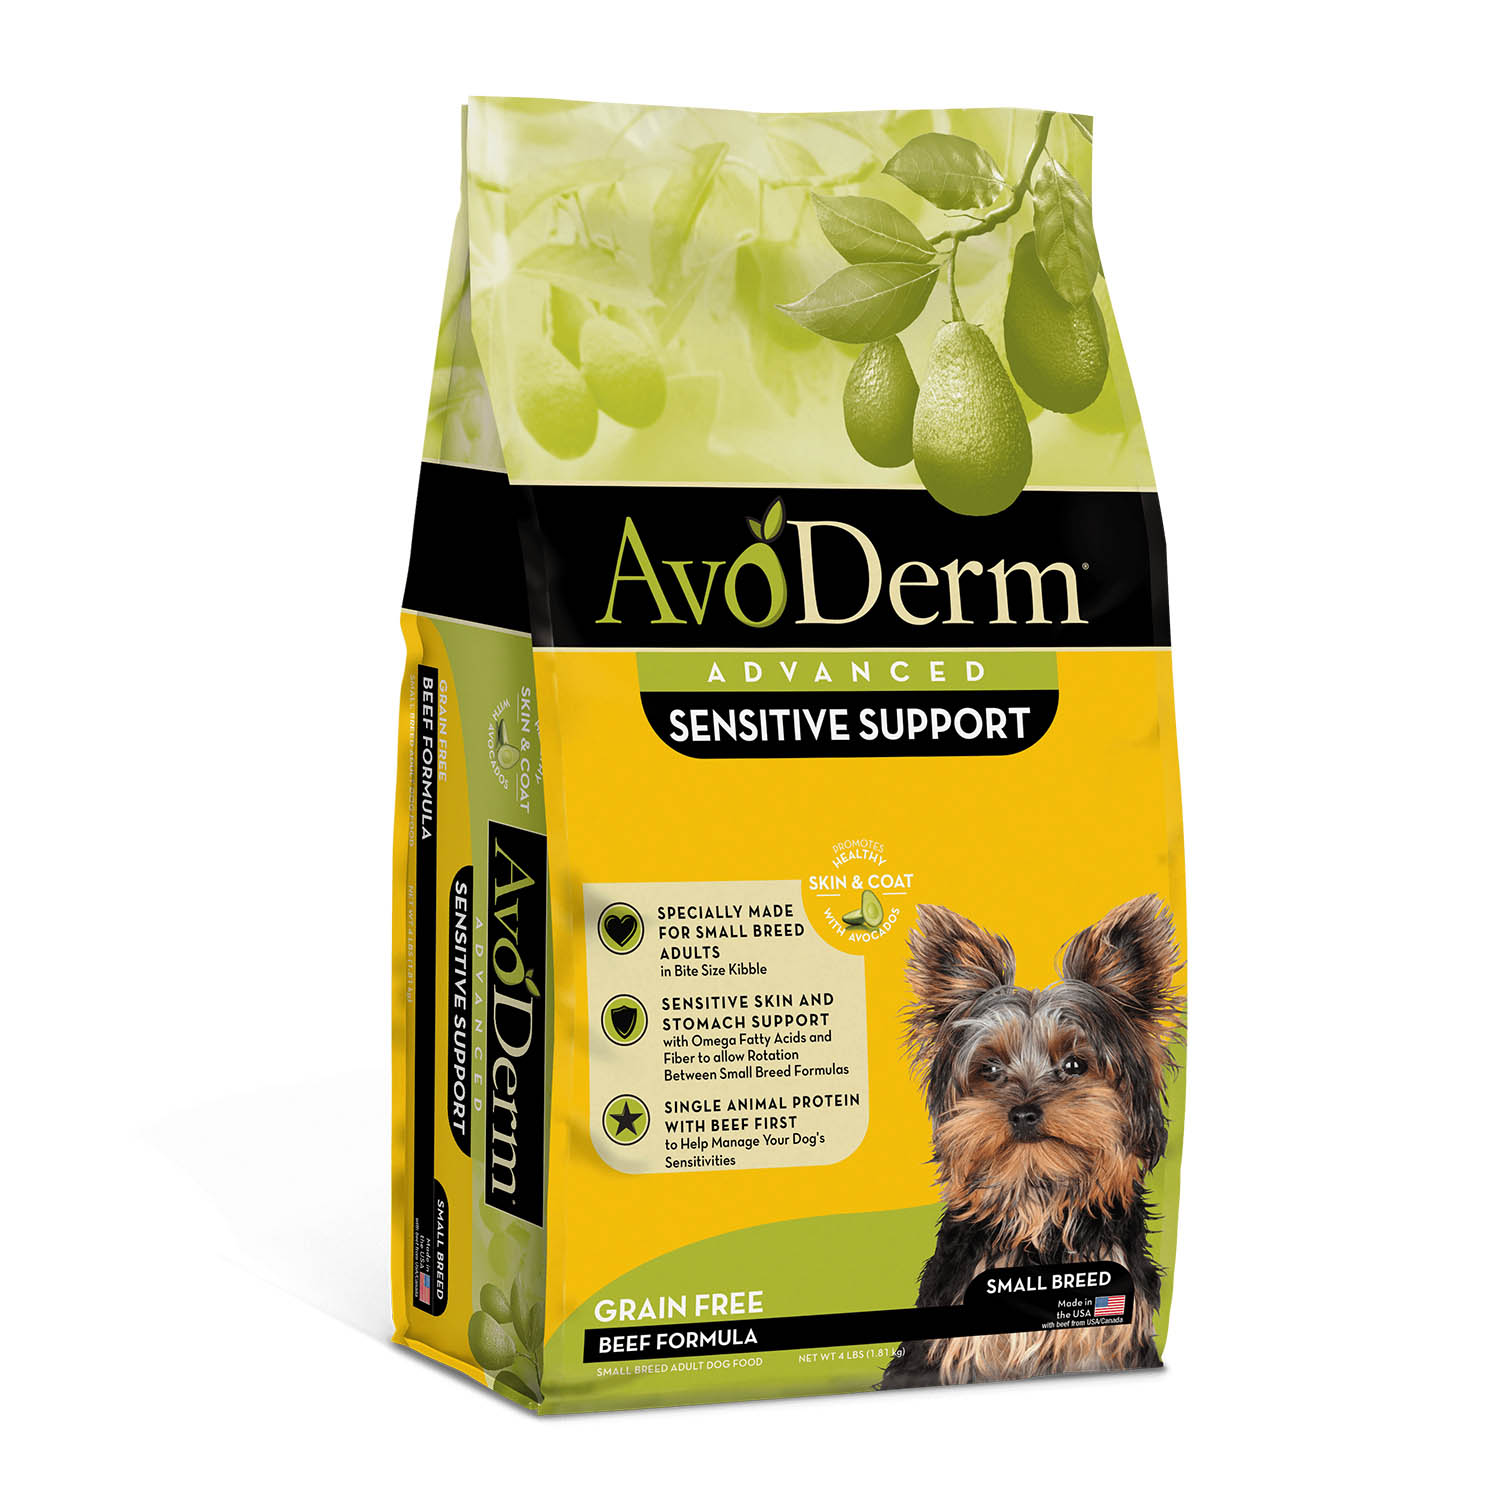 avoderm-advanced-sensitive-support-grain-free-small-breed-beef-formula-dry-dog-food